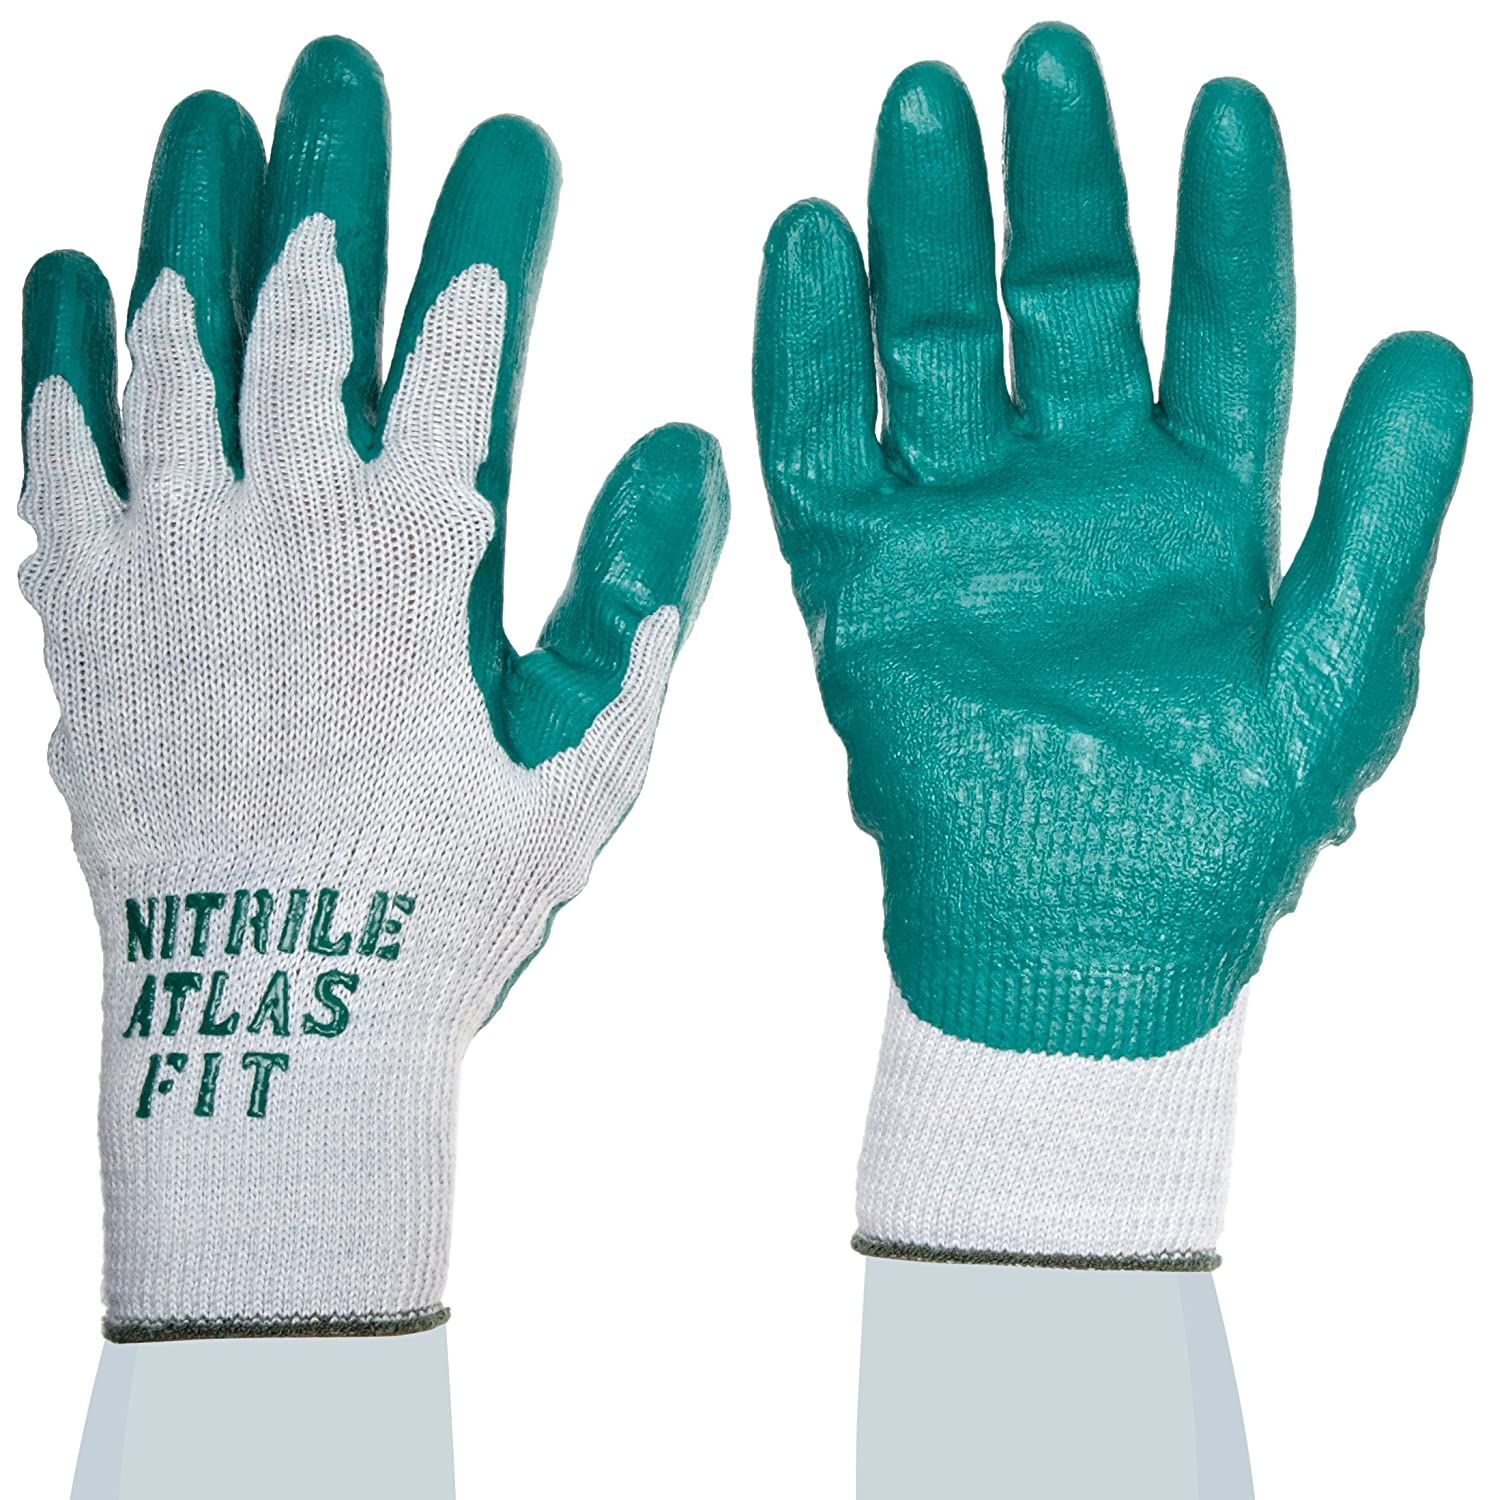 Nitrile palm coating,  Hi vis yellow/green coating, 10 gauge seamless cut resistant liner made with polyester/stainless steel, Hagane Coil™ Technology, extra large, ANSI CUT LEVEL A4